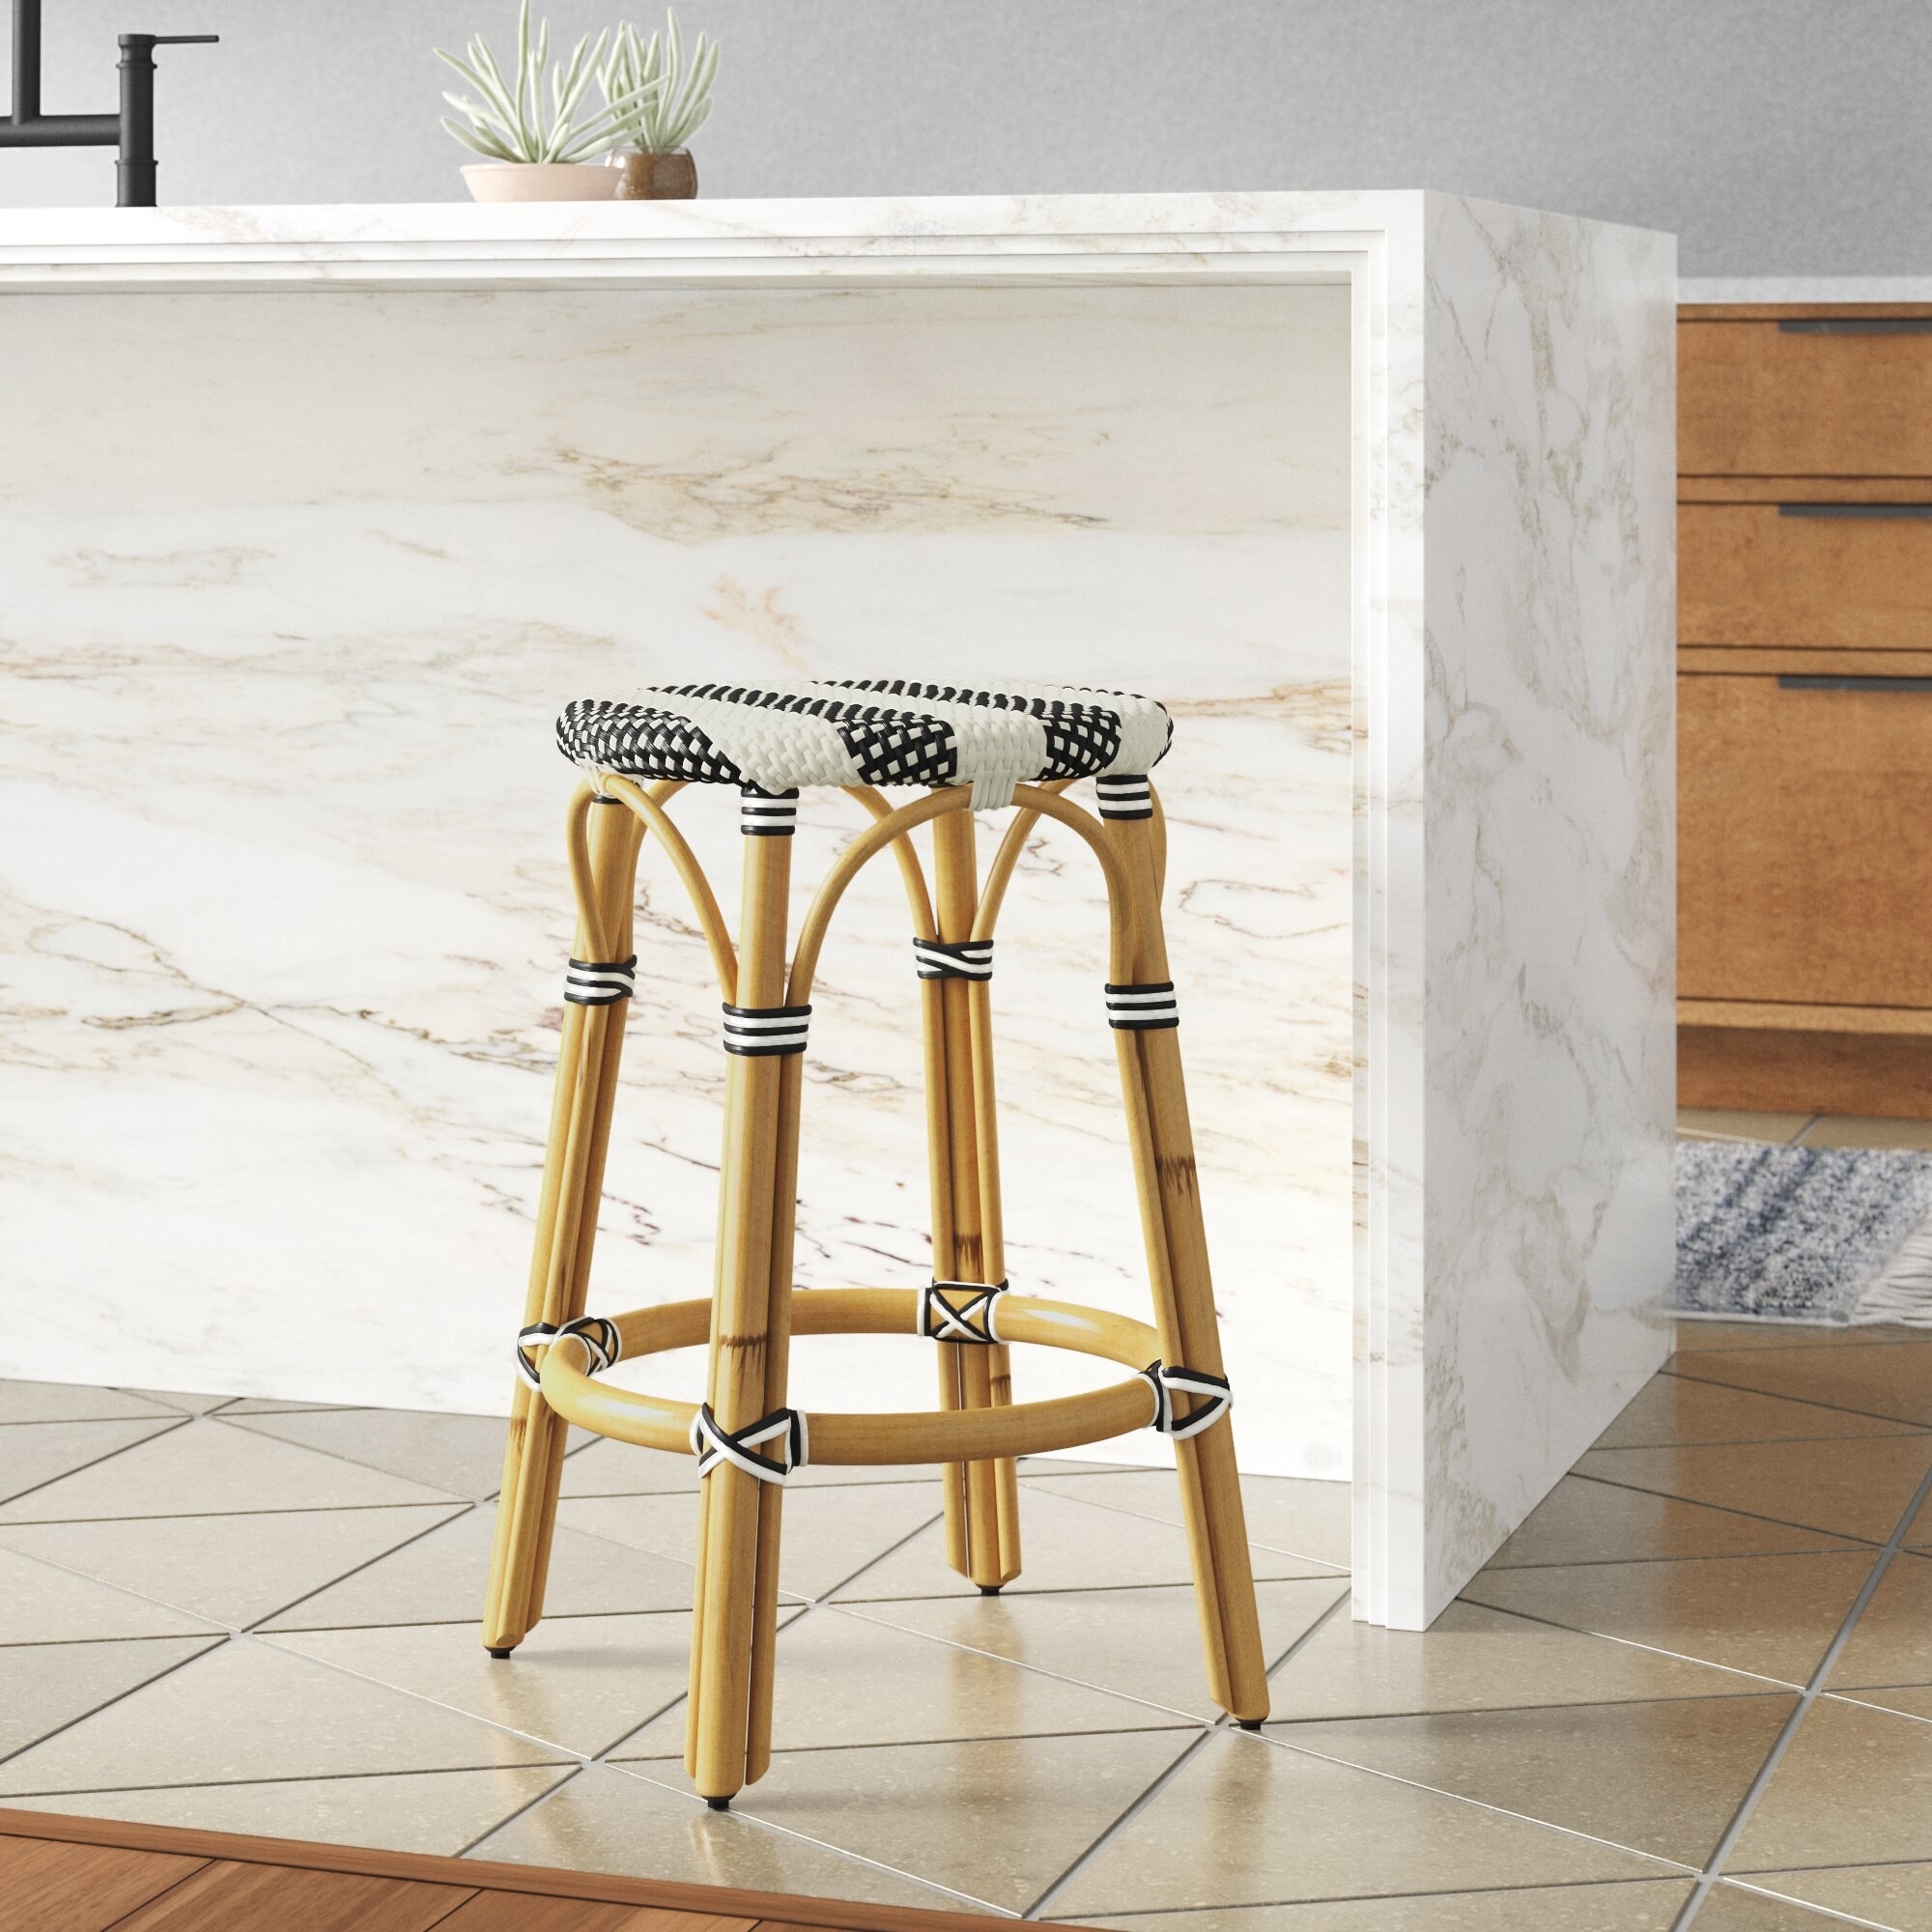 the woven counter-height stool